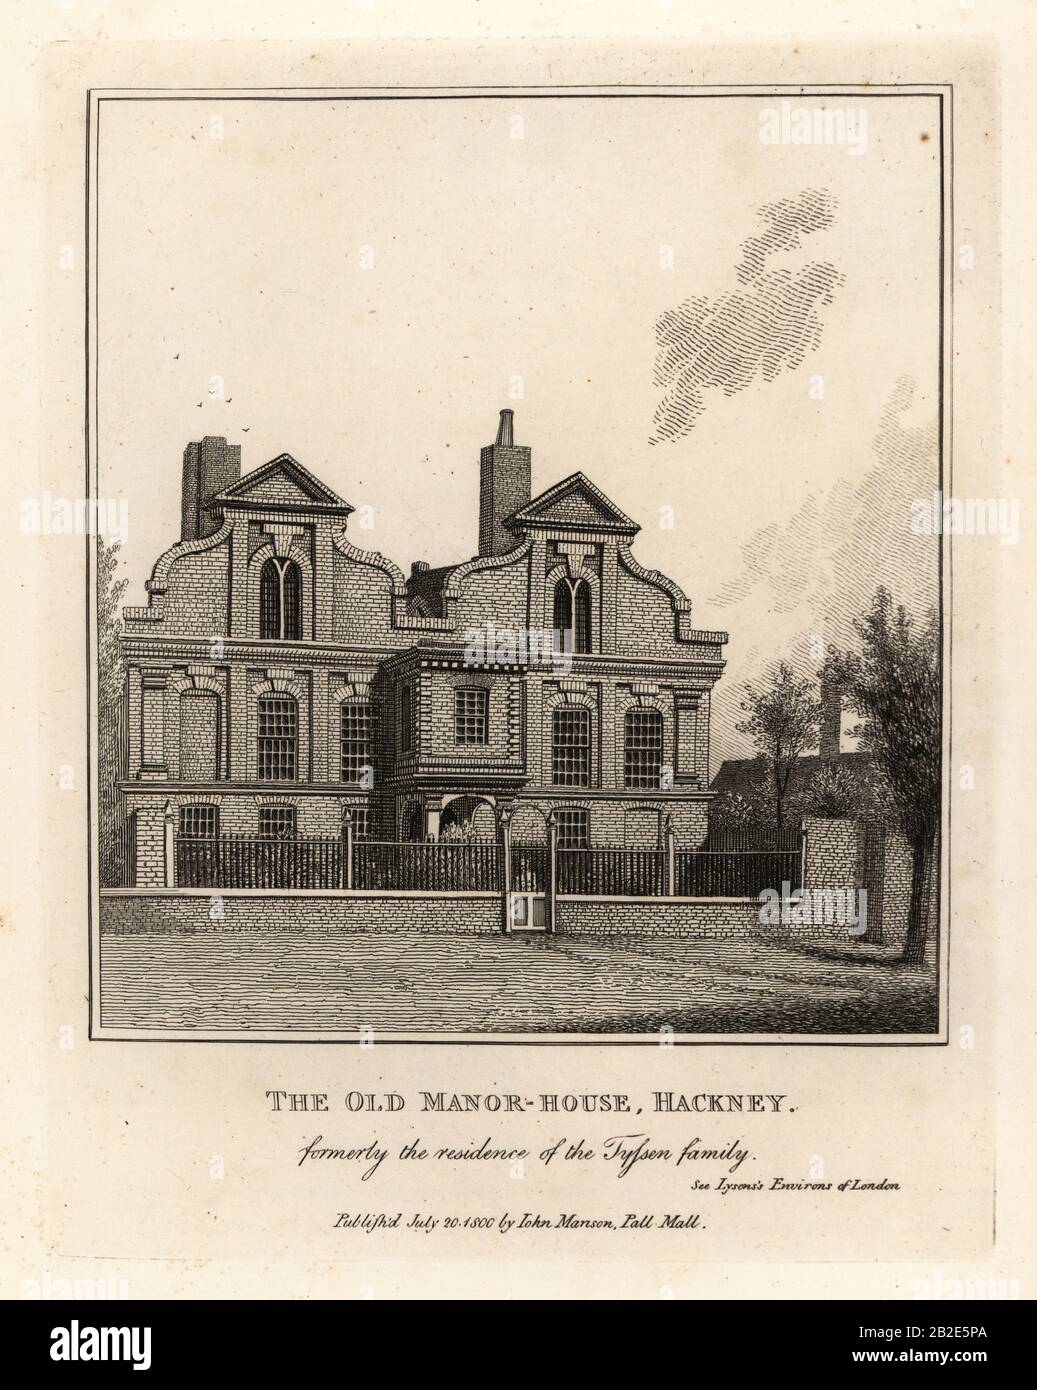 The Old Manor House, Hackney, formerly the residence of the Tyssen family. Copperplate engraving by John Thomas Smith after original drawings by members of the Society of Antiquaries from his J.T. Smith’s Antiquities of London and its Environs, J. Sewell, R. Folder, J. Simco, London, 1800. Stock Photo